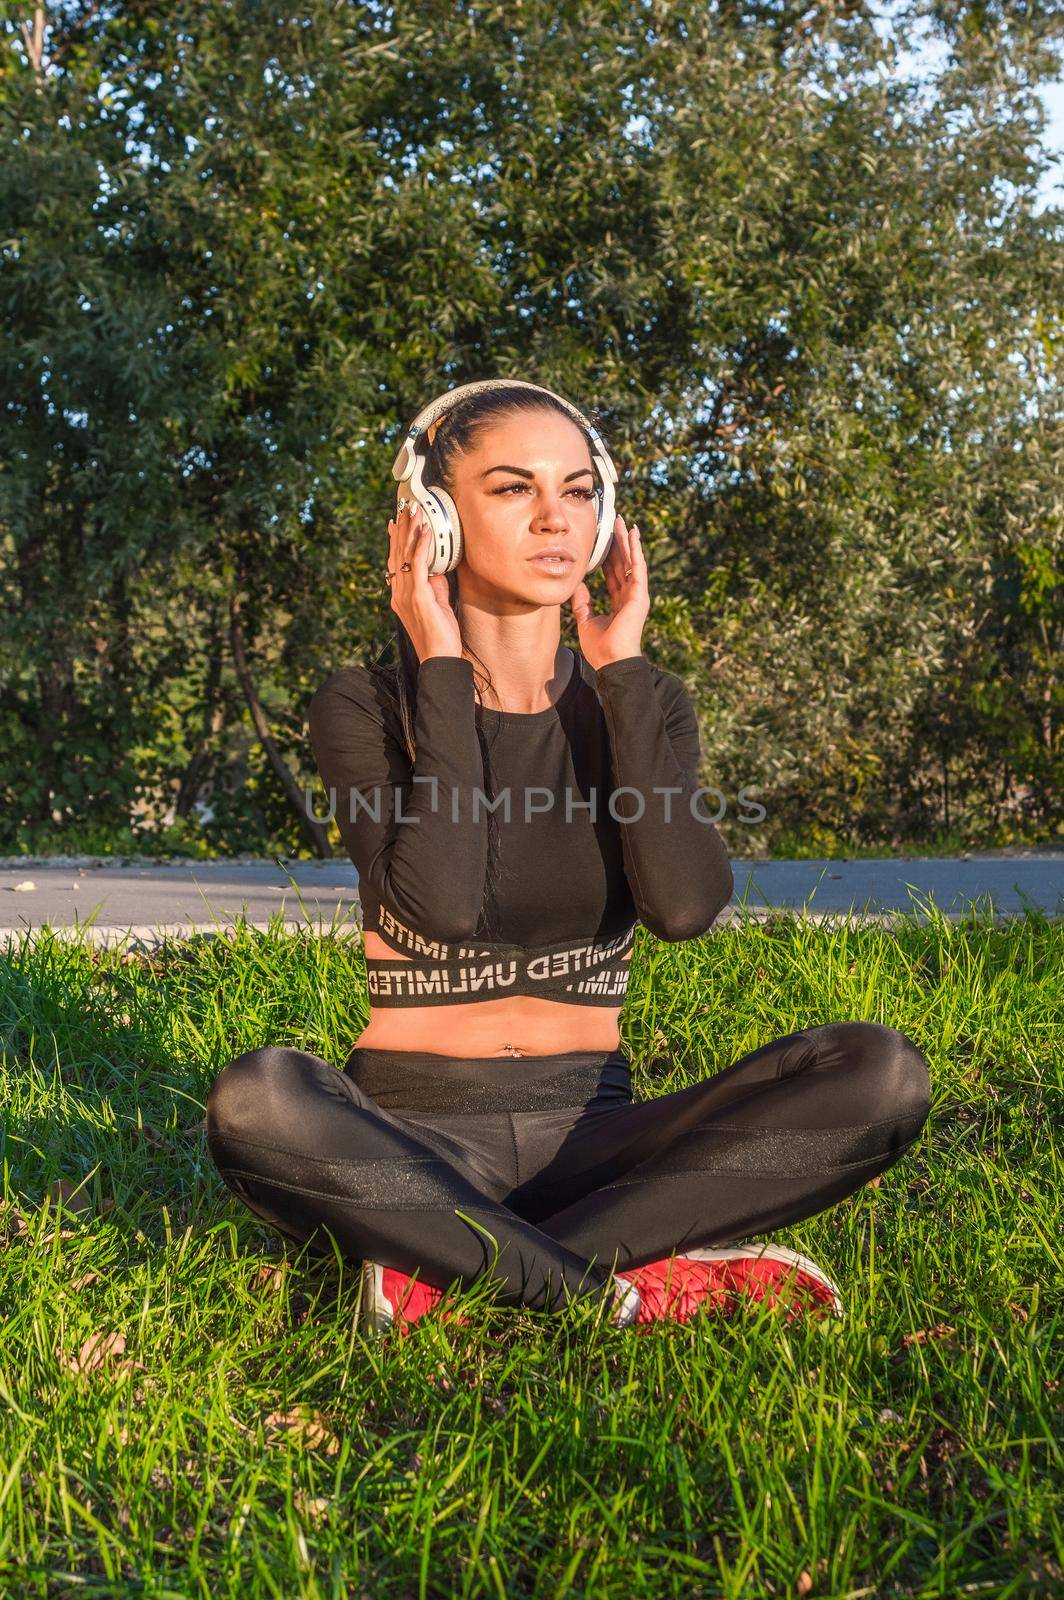 Fitness model lying and relaxing with headphones./Pretty young girl listening to music with headphones.